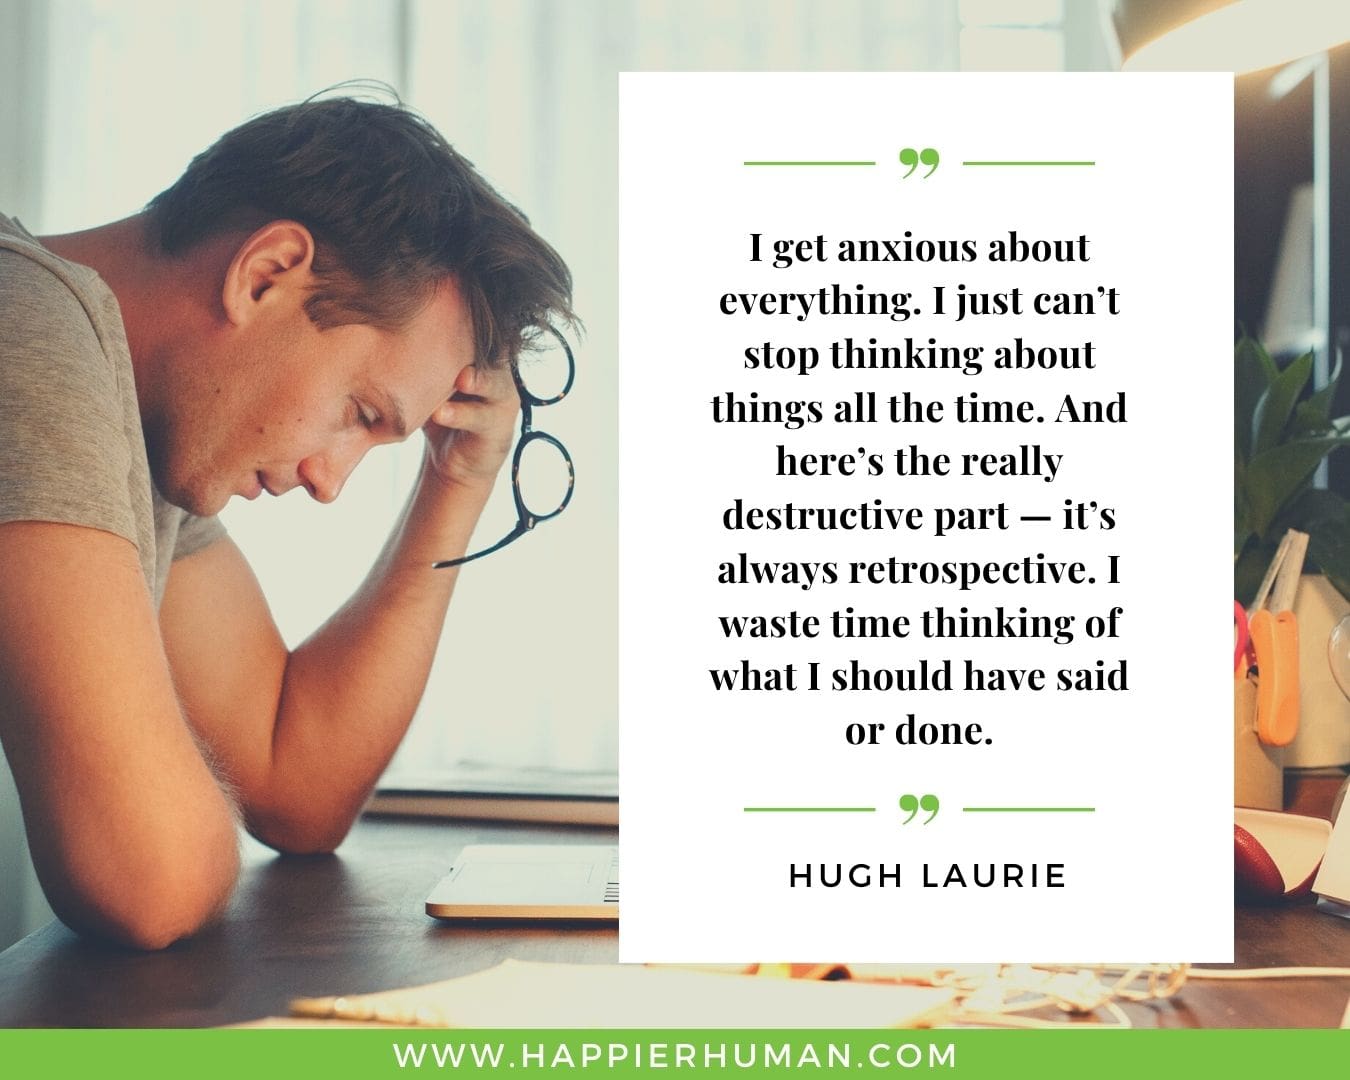 Overthinking Quotes - “I get anxious about everything. I just can’t stop thinking about things all the time. And here’s the really destructive part — it’s always retrospective. I waste time thinking of what I should have said or done.” - Hugh Laurie